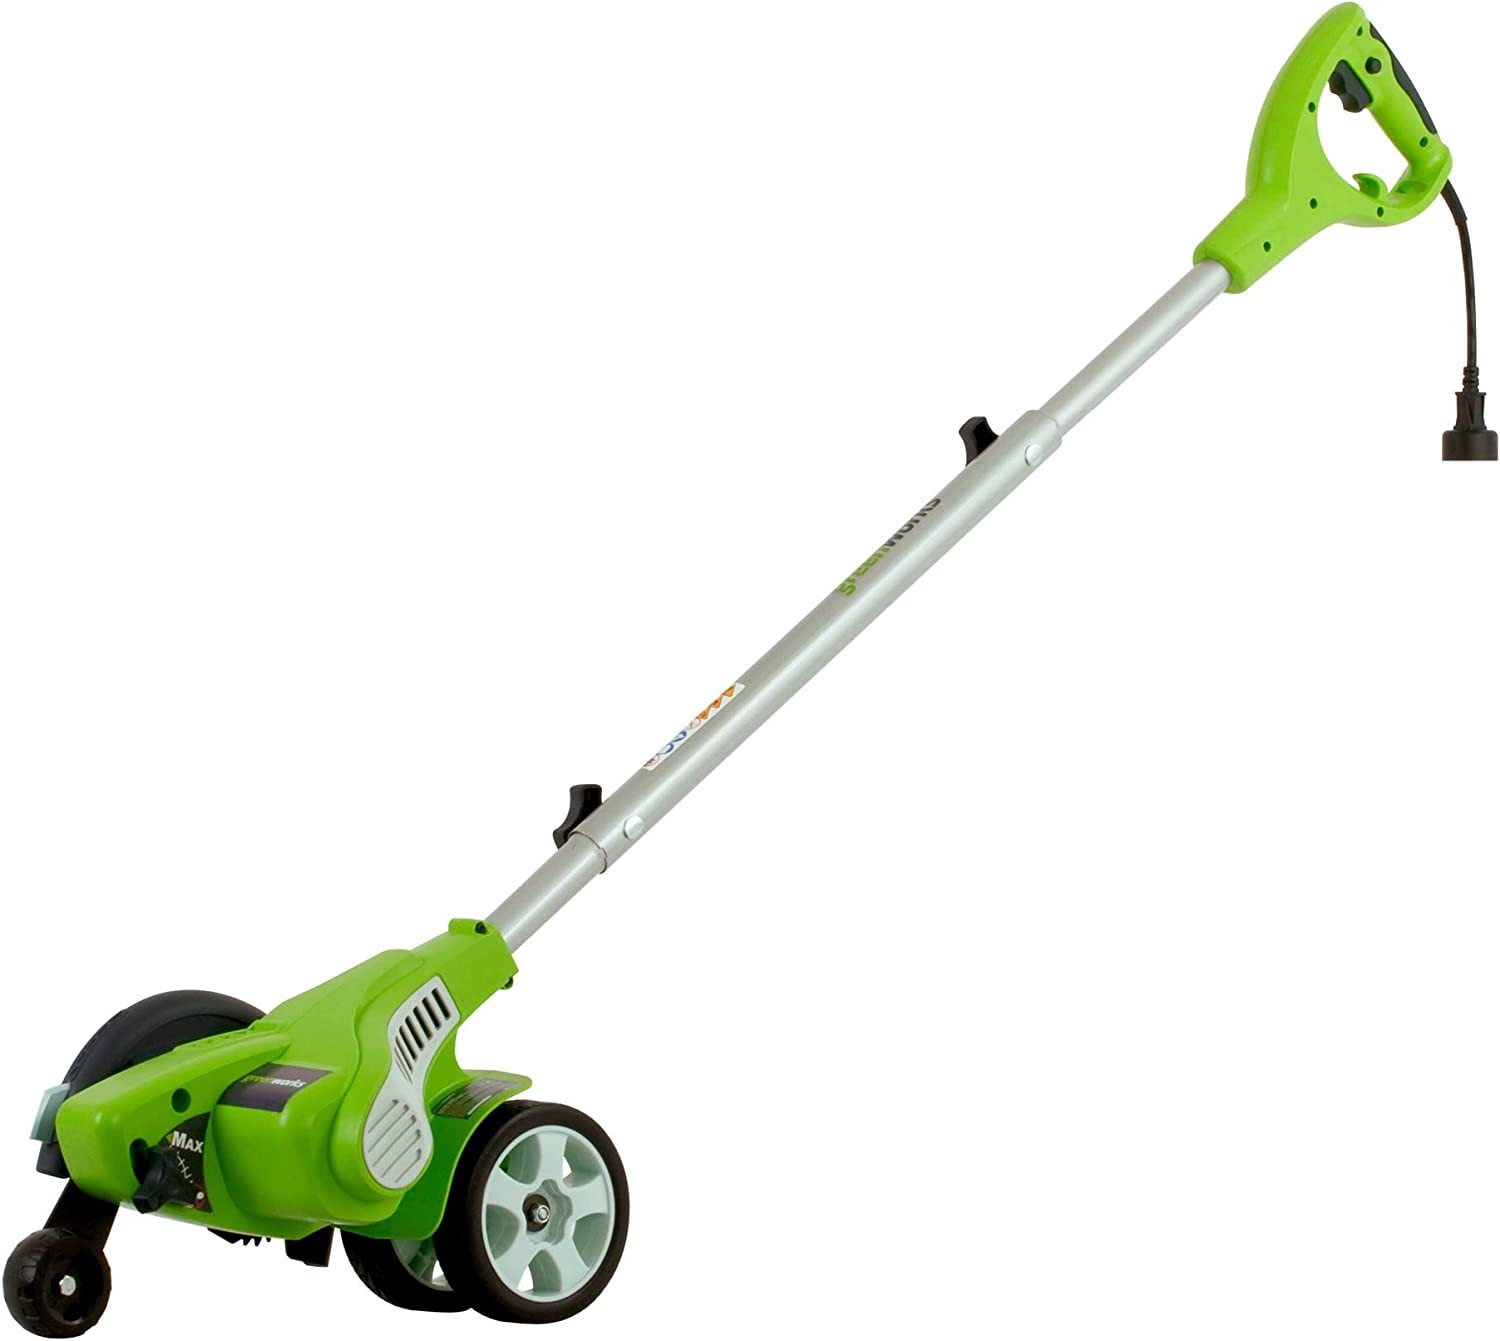 Greenworks 12 Amp Electric Corded Edger 27032 - $124.99